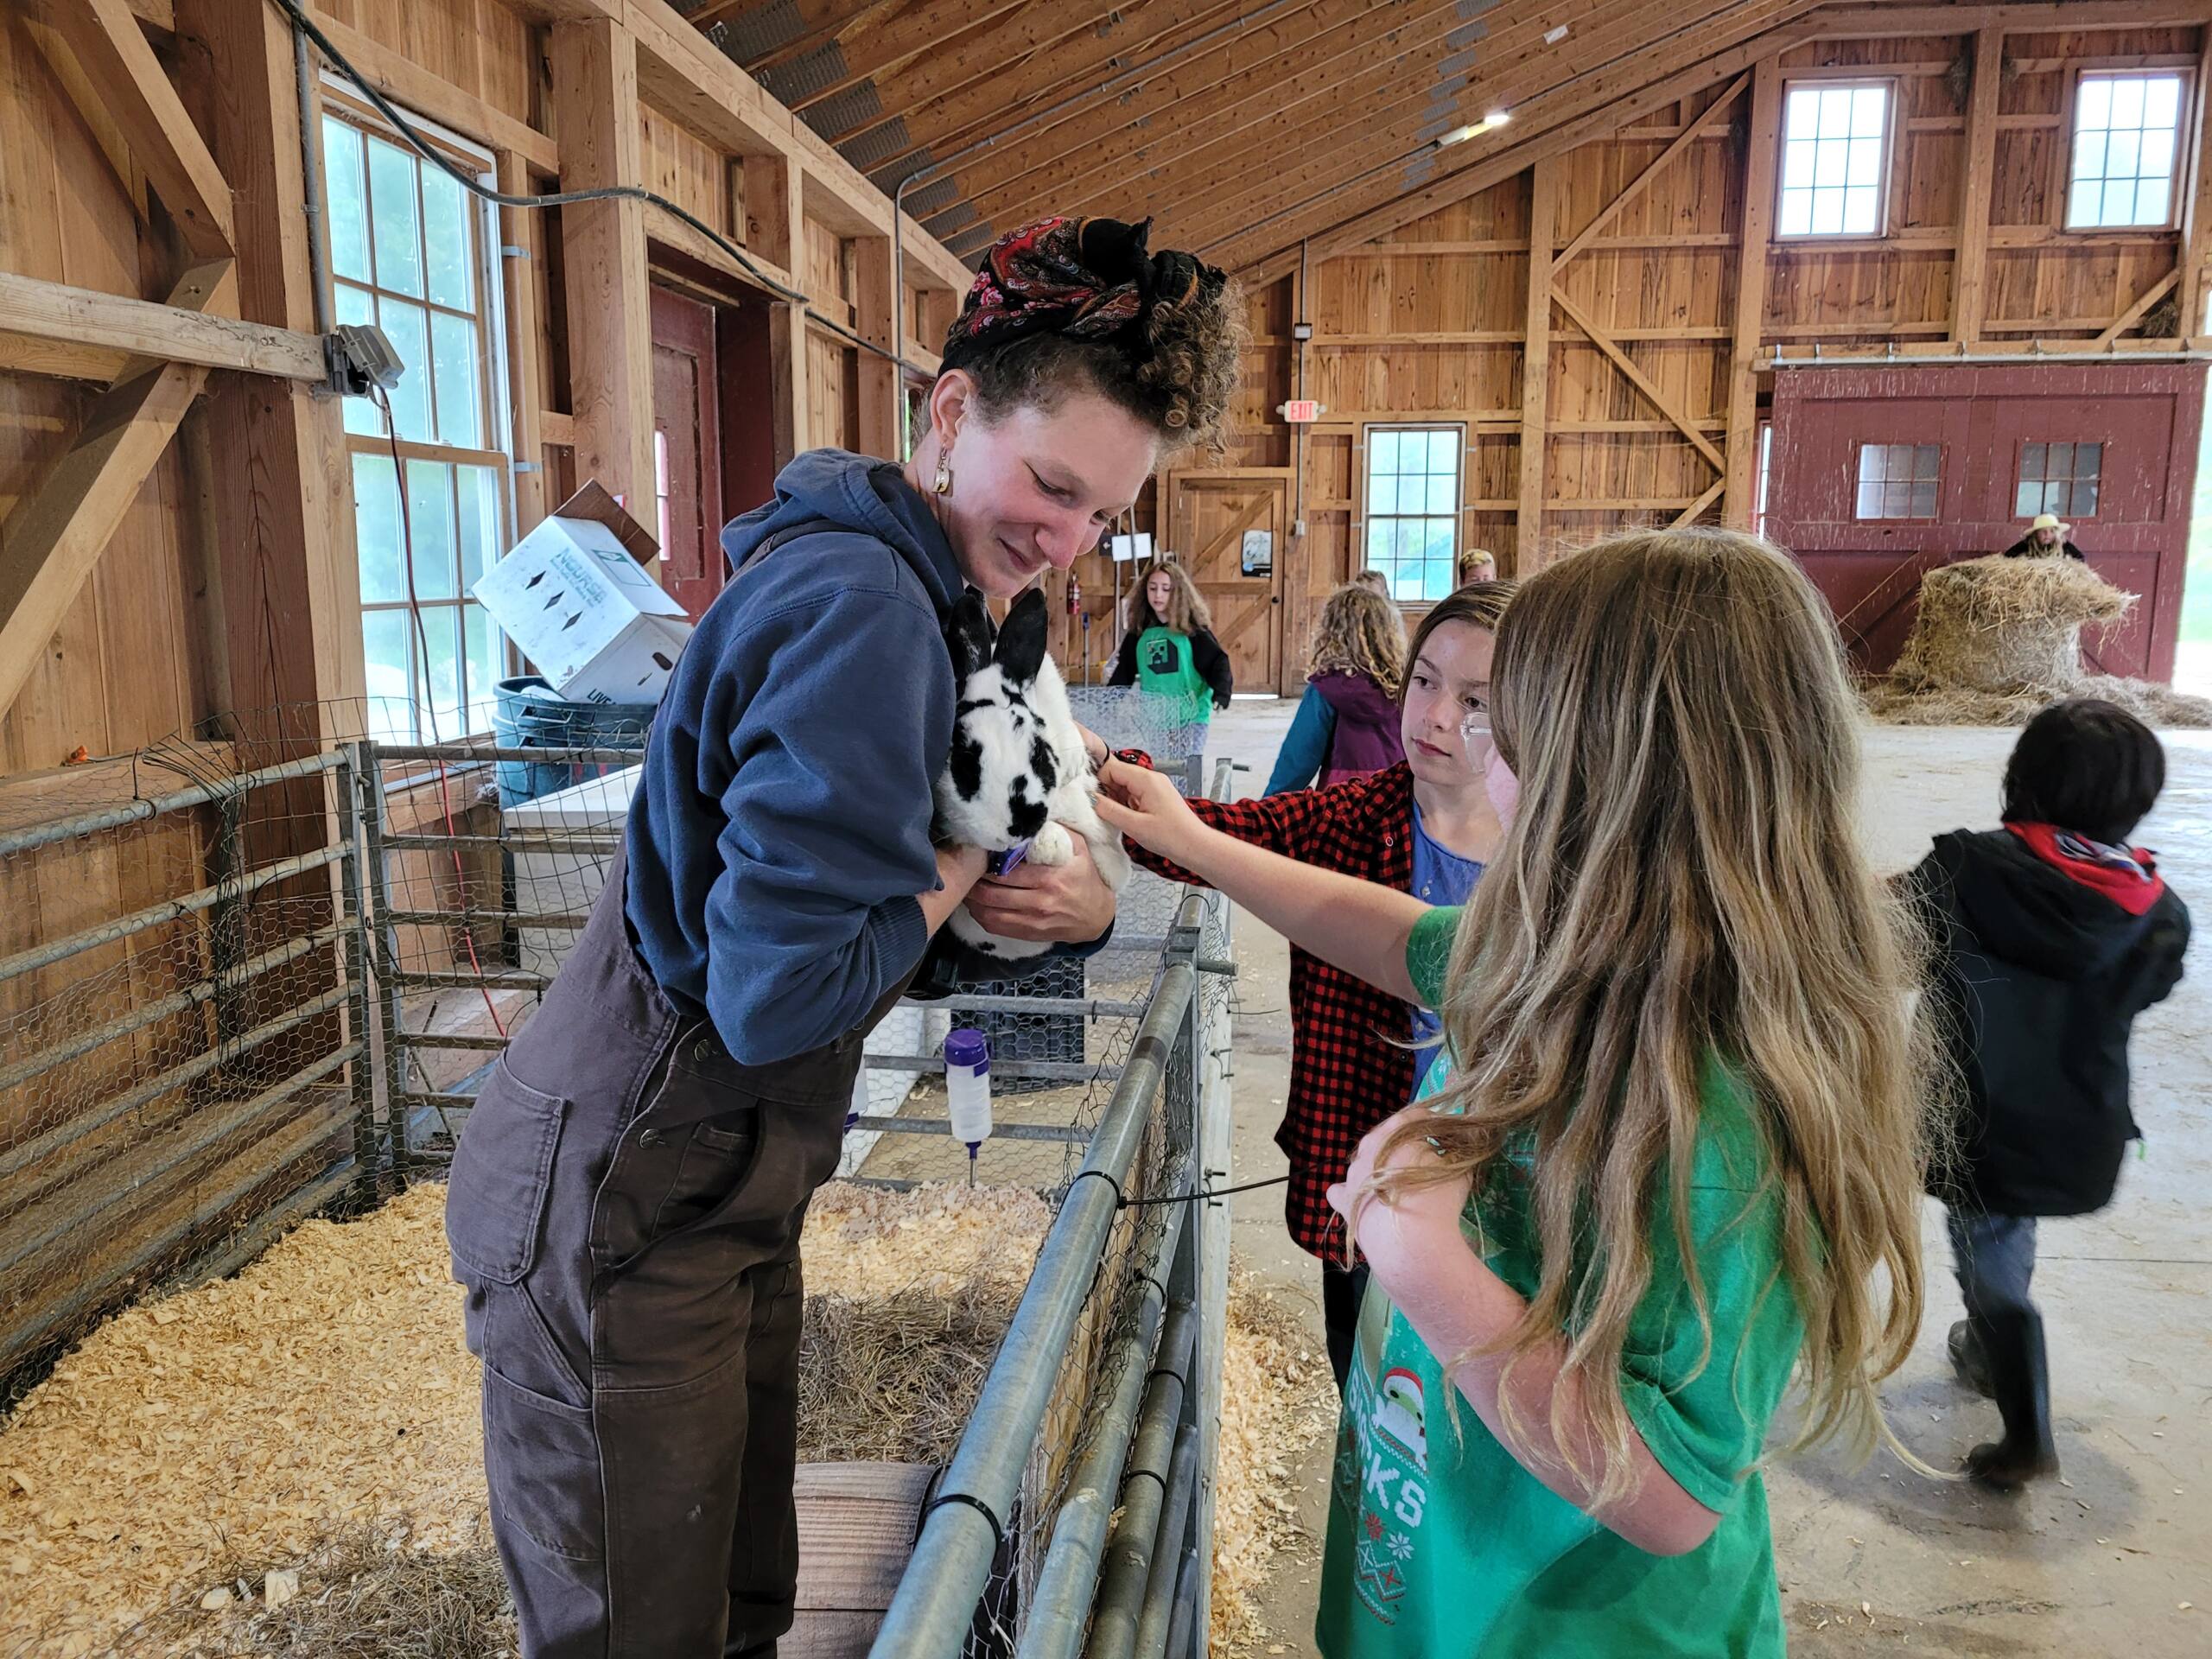 Kids petting a bunny being held by an instructor